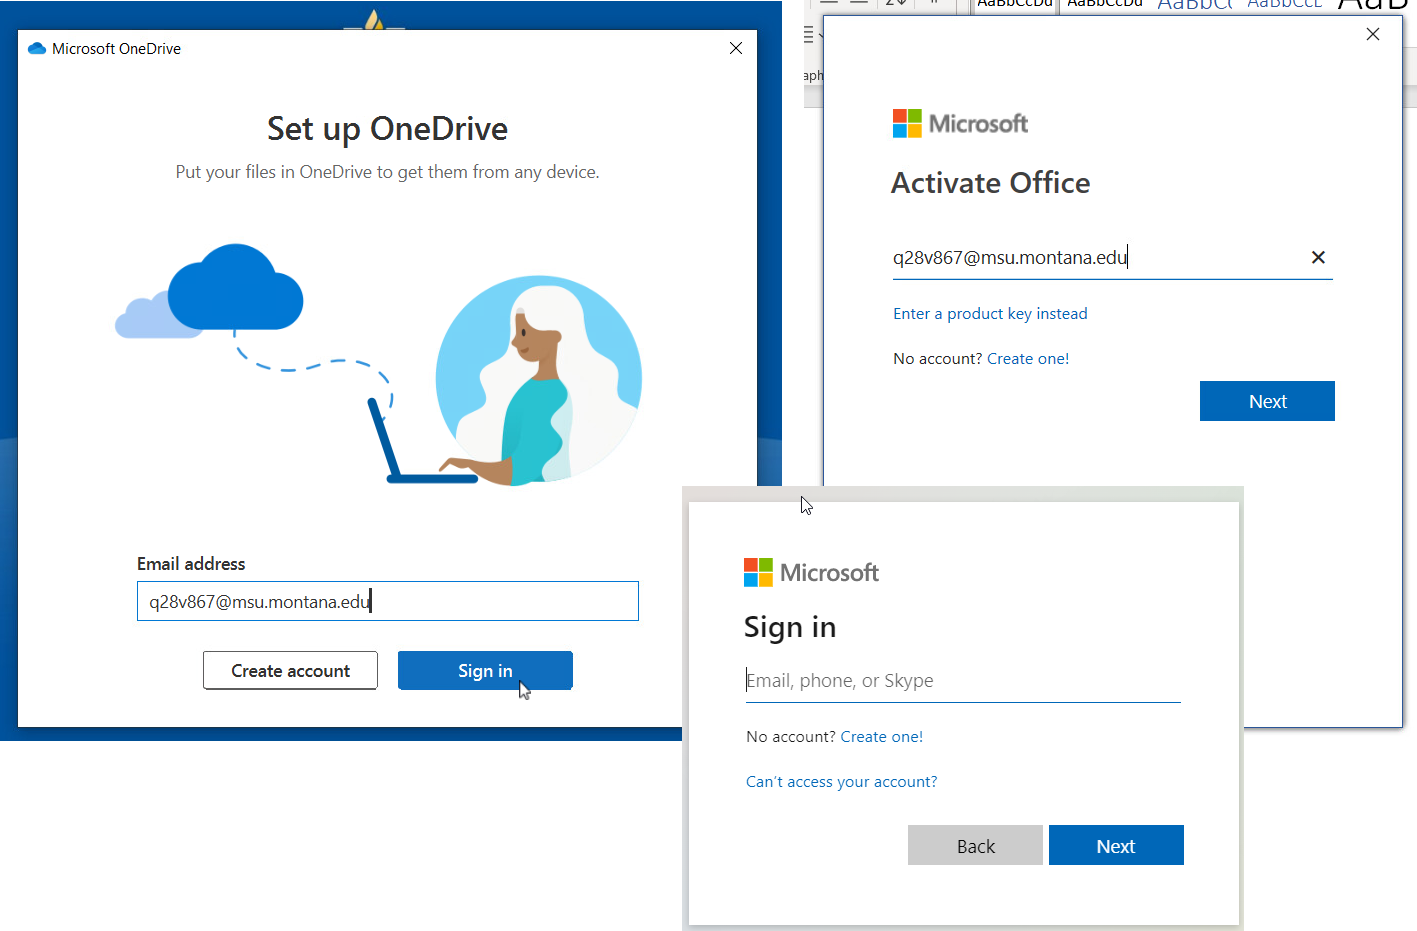 examples of Microsoft sign in pages asking to enter email